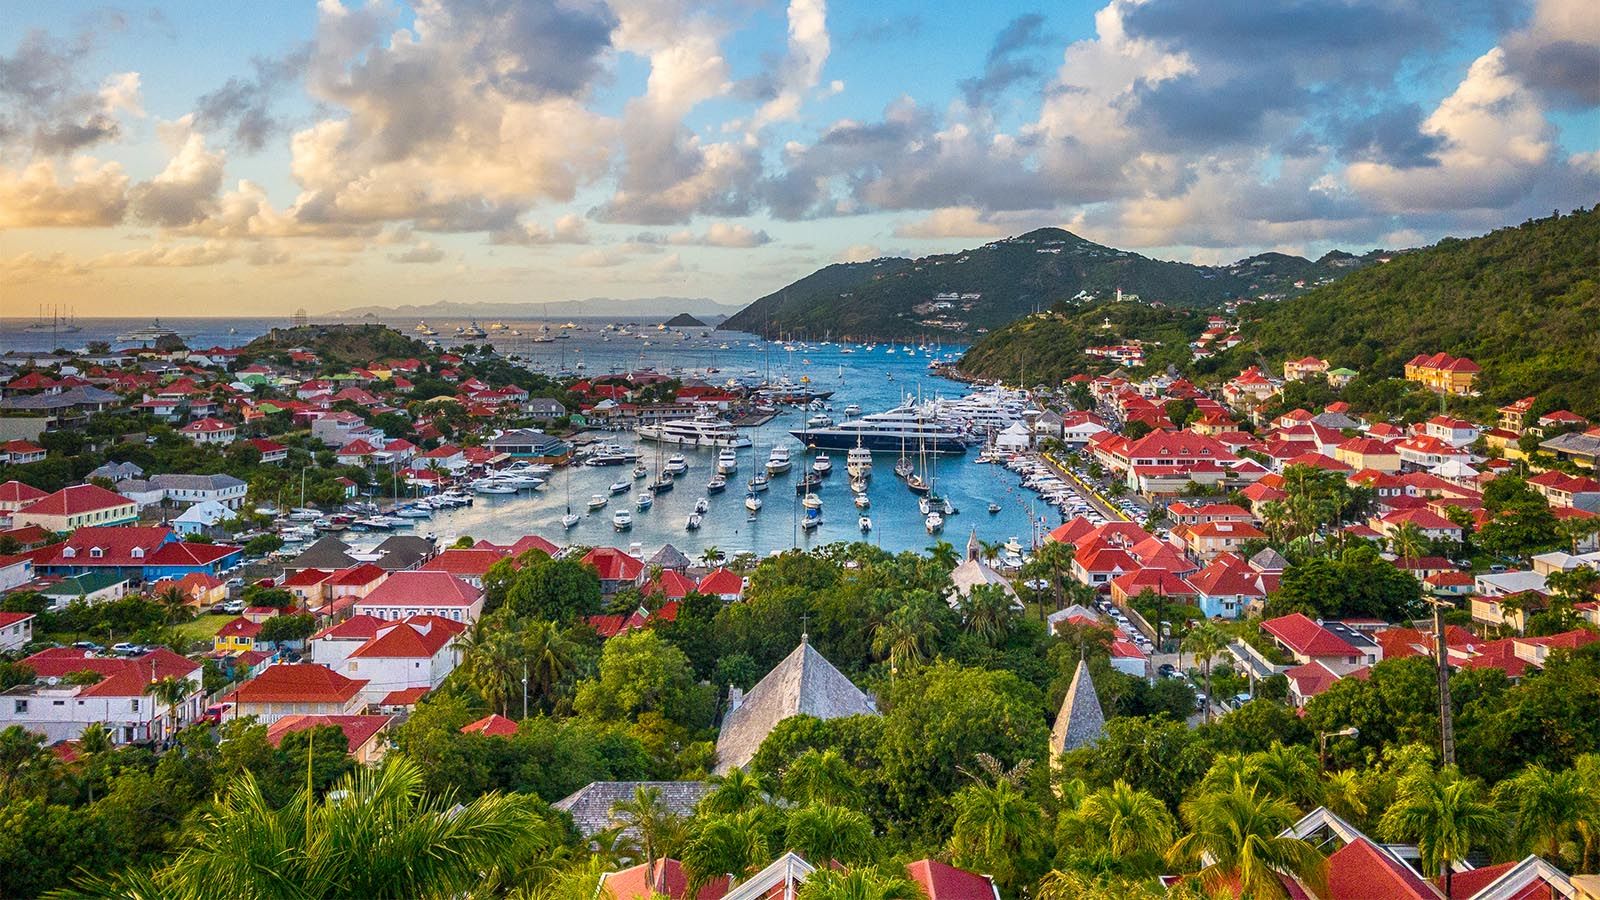 St Barts, Discover the best clubs and events